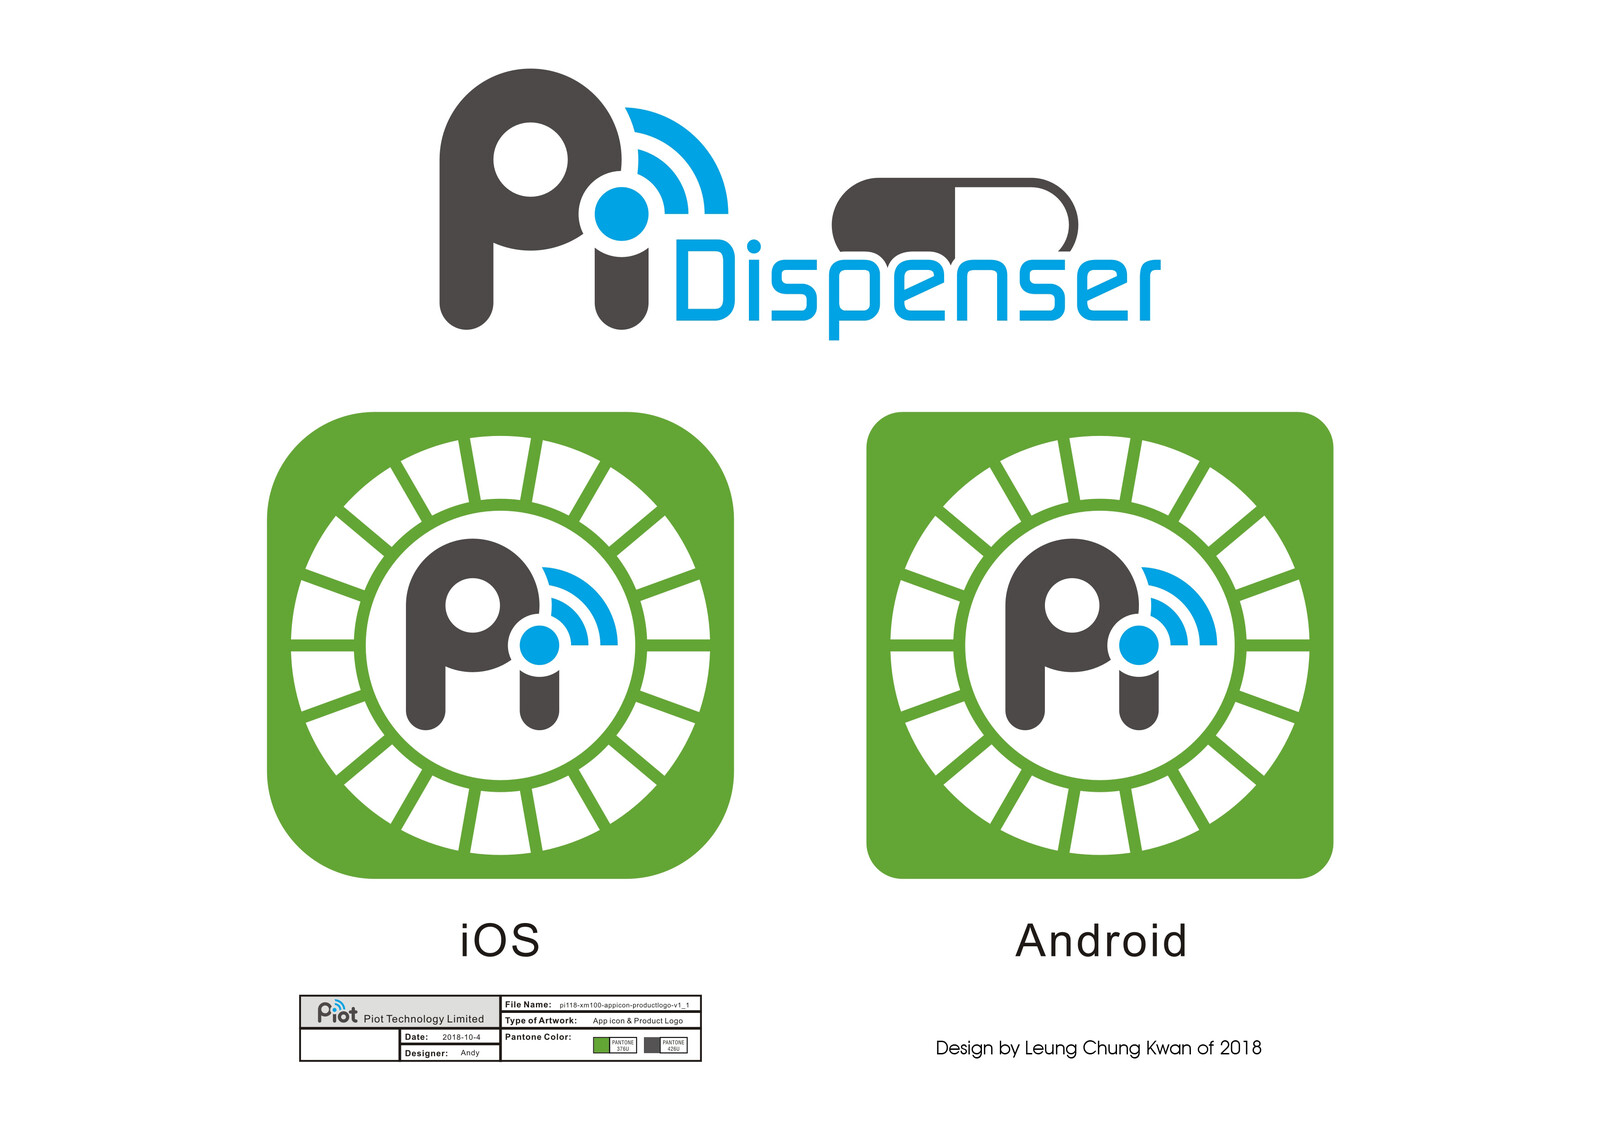 💎 App Icon | Design by Leung Chung Kwan on 2018 💎
App Name︰Pidispenser | Client︰Piot Technology Limited